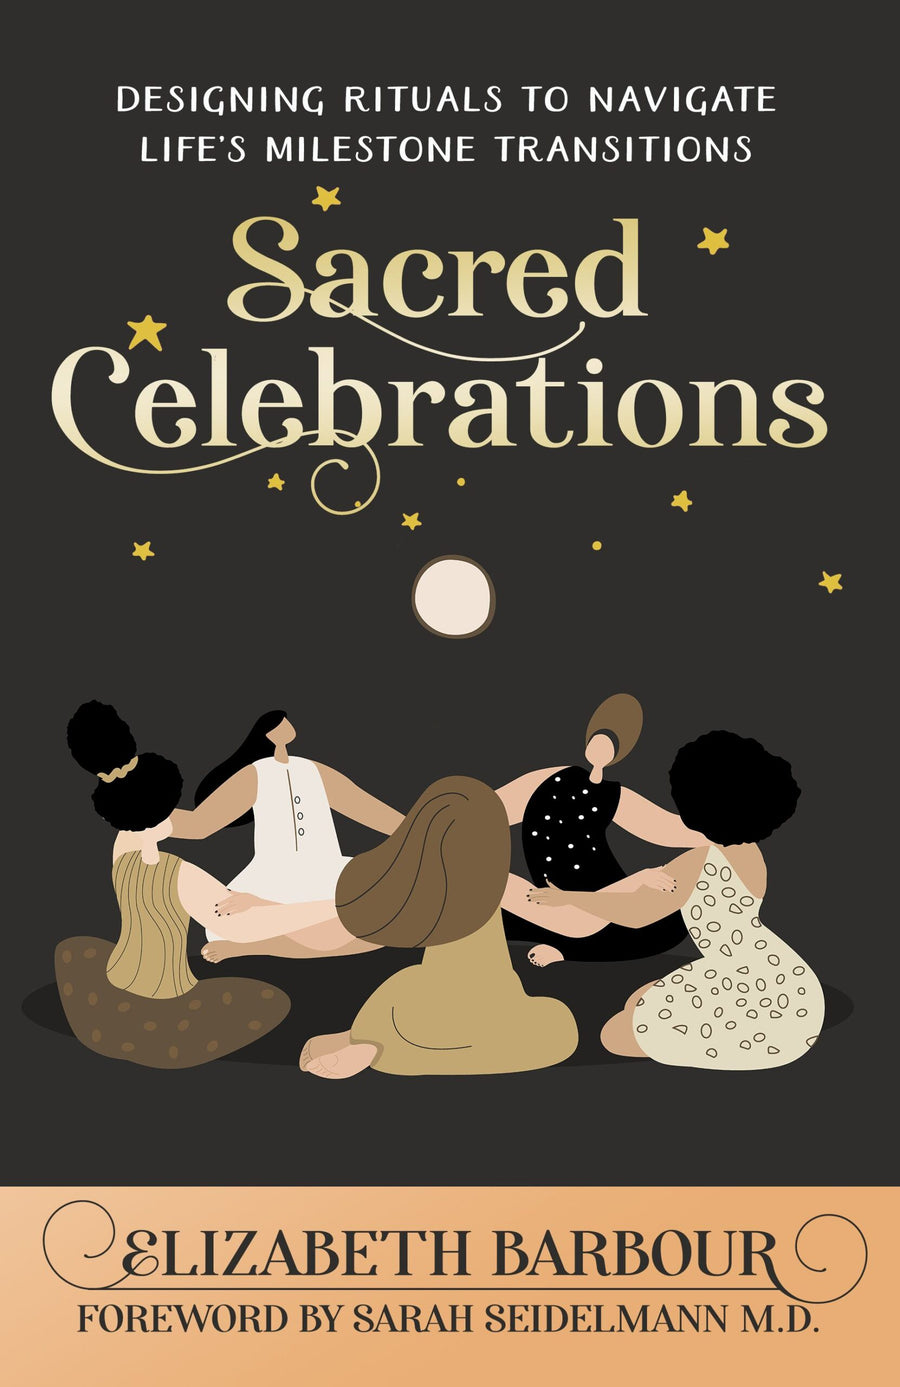 Sacred Celebrations - Designing Rituals to Navigate Life's Milestone Transitions